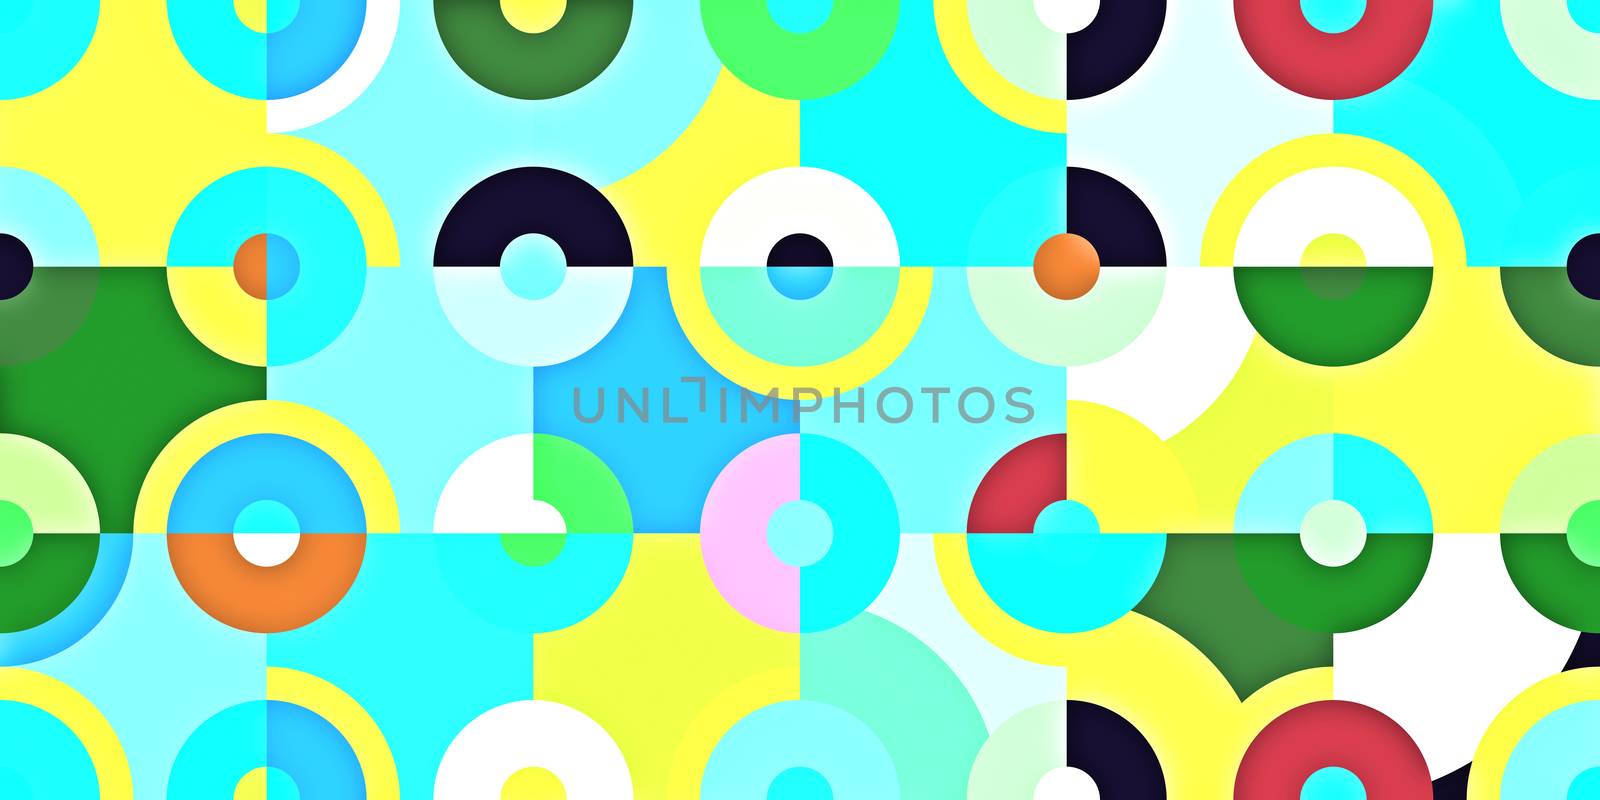 Circle Quarters Backgrounds. Seamless Bright Angles Textures. Abstract Colored Curves Patterns. by sanches812